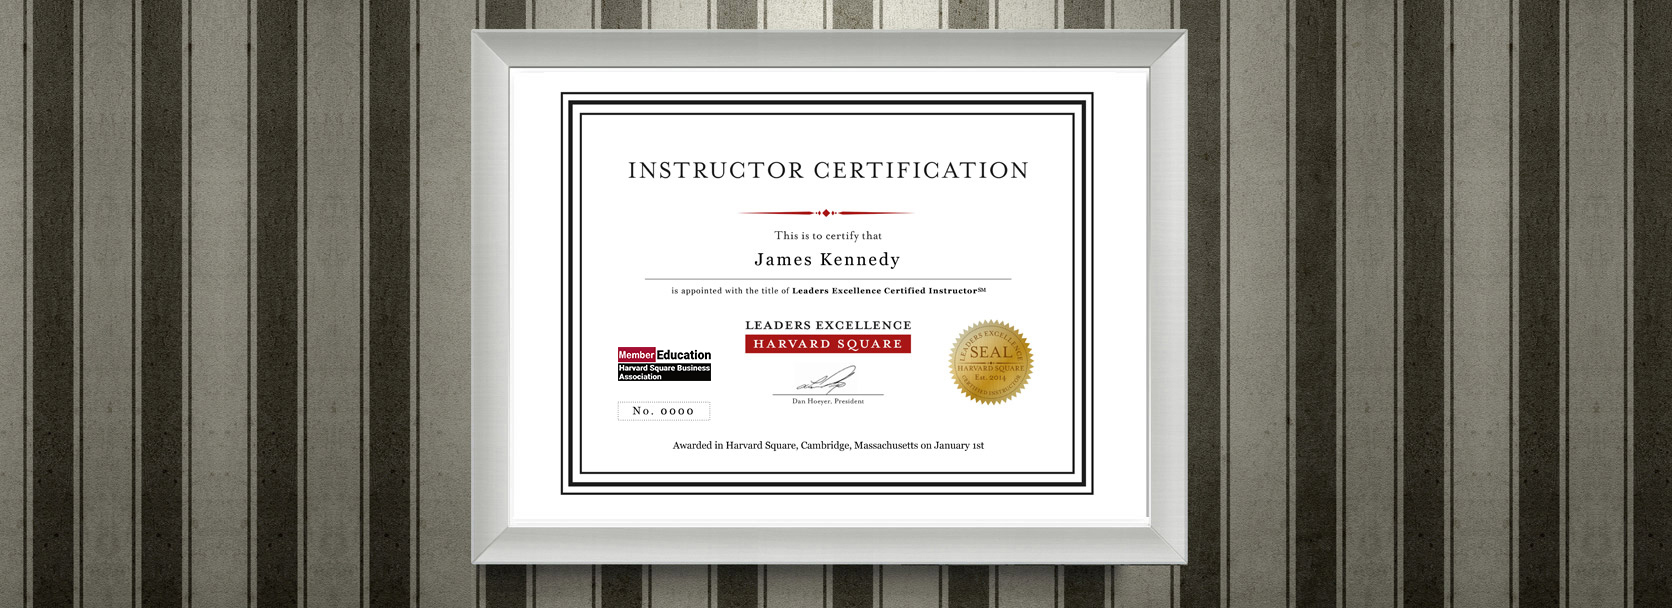 Framed instructor certification from Leaders Excellence hanging on a wall